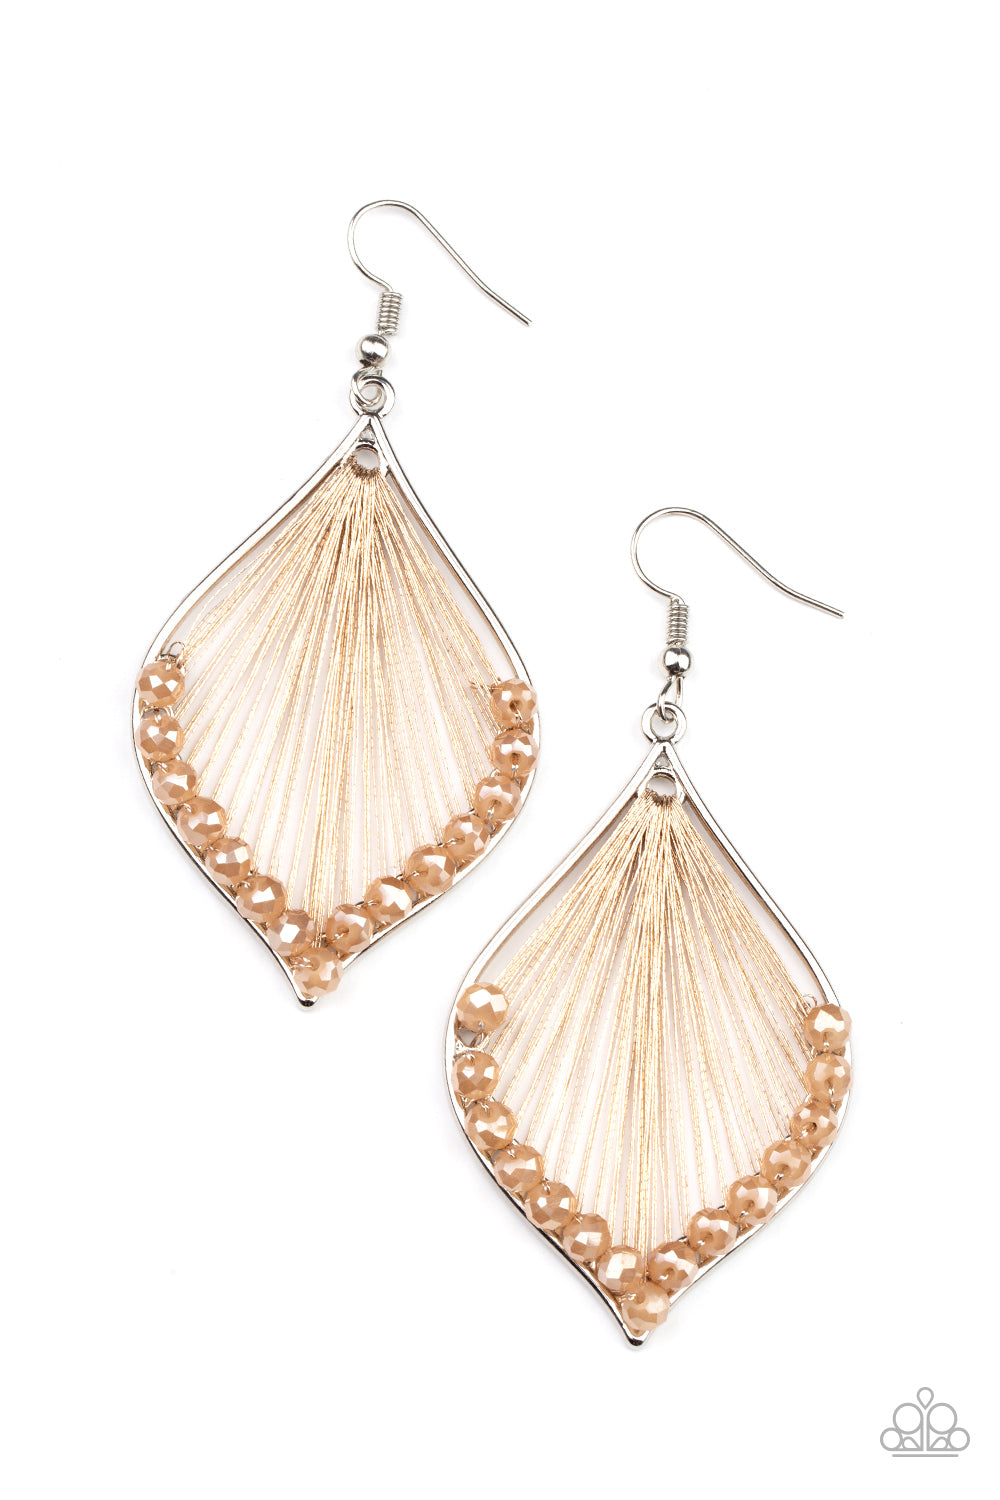 Paparazzi Accessories - Pulling at My HARP-strings #E465 - Brown Earrings